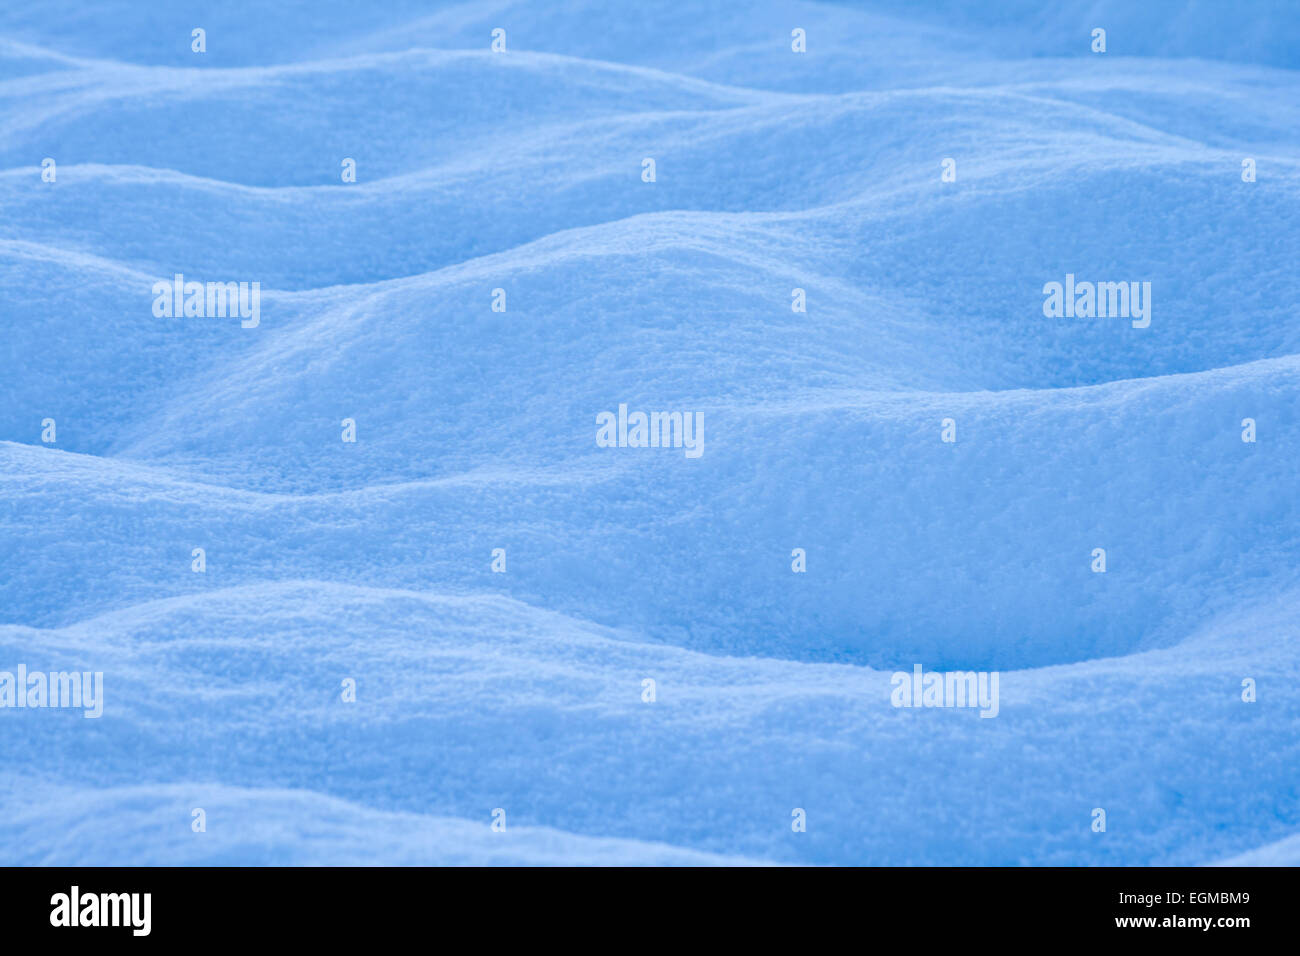 Blue Waves Background Texture Stock Photo